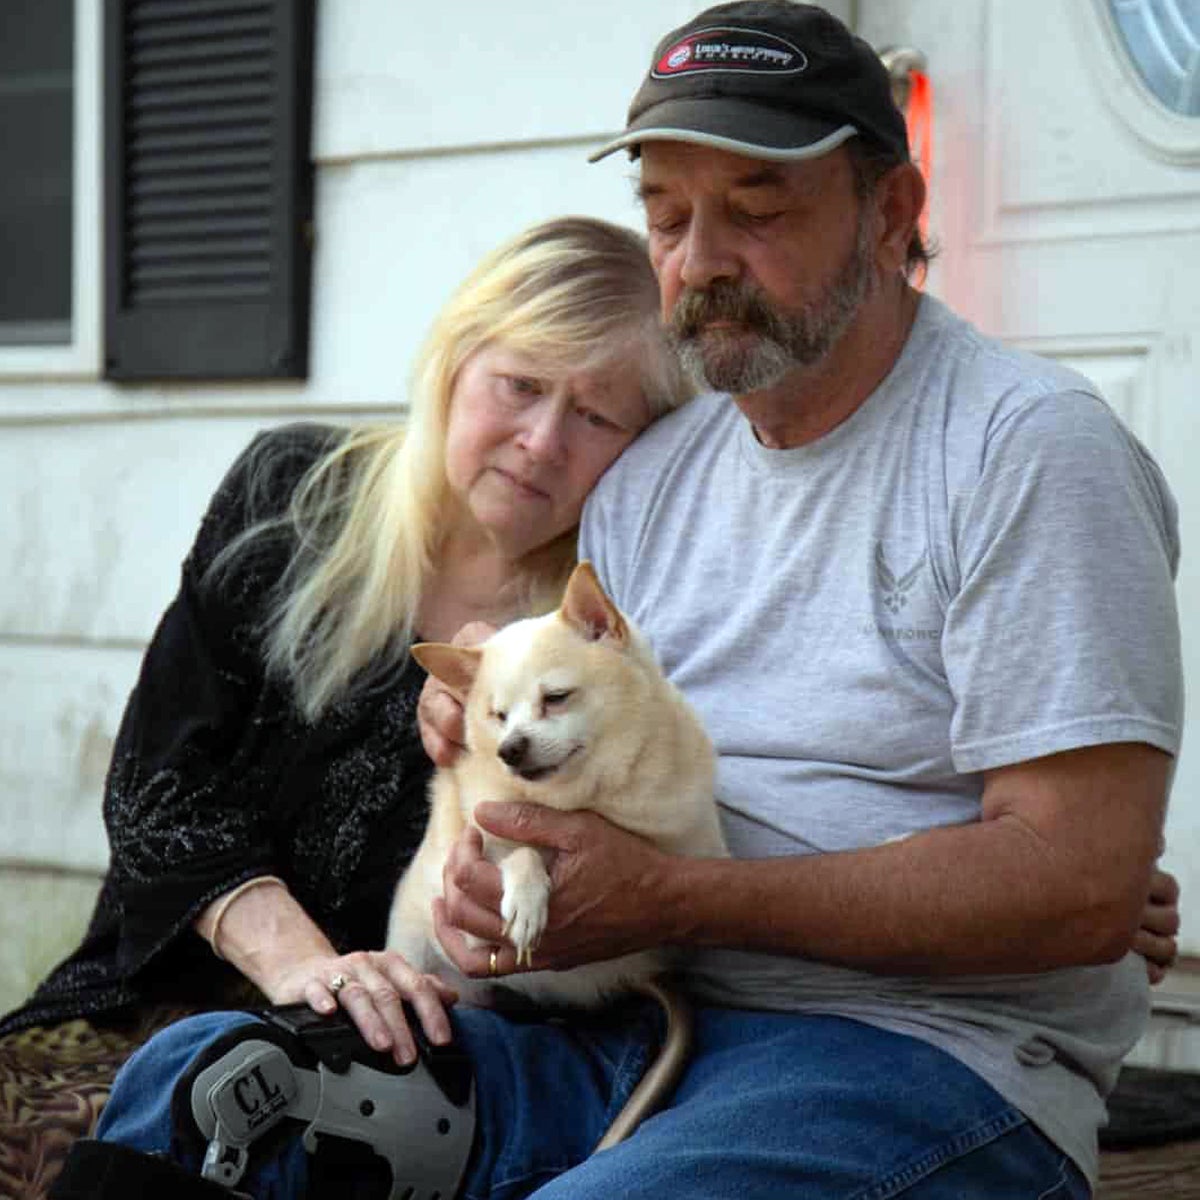 John, Crystal, and their dog sit on the porch of their flooded home. Miracles surround their escape from Hurricane Florence.